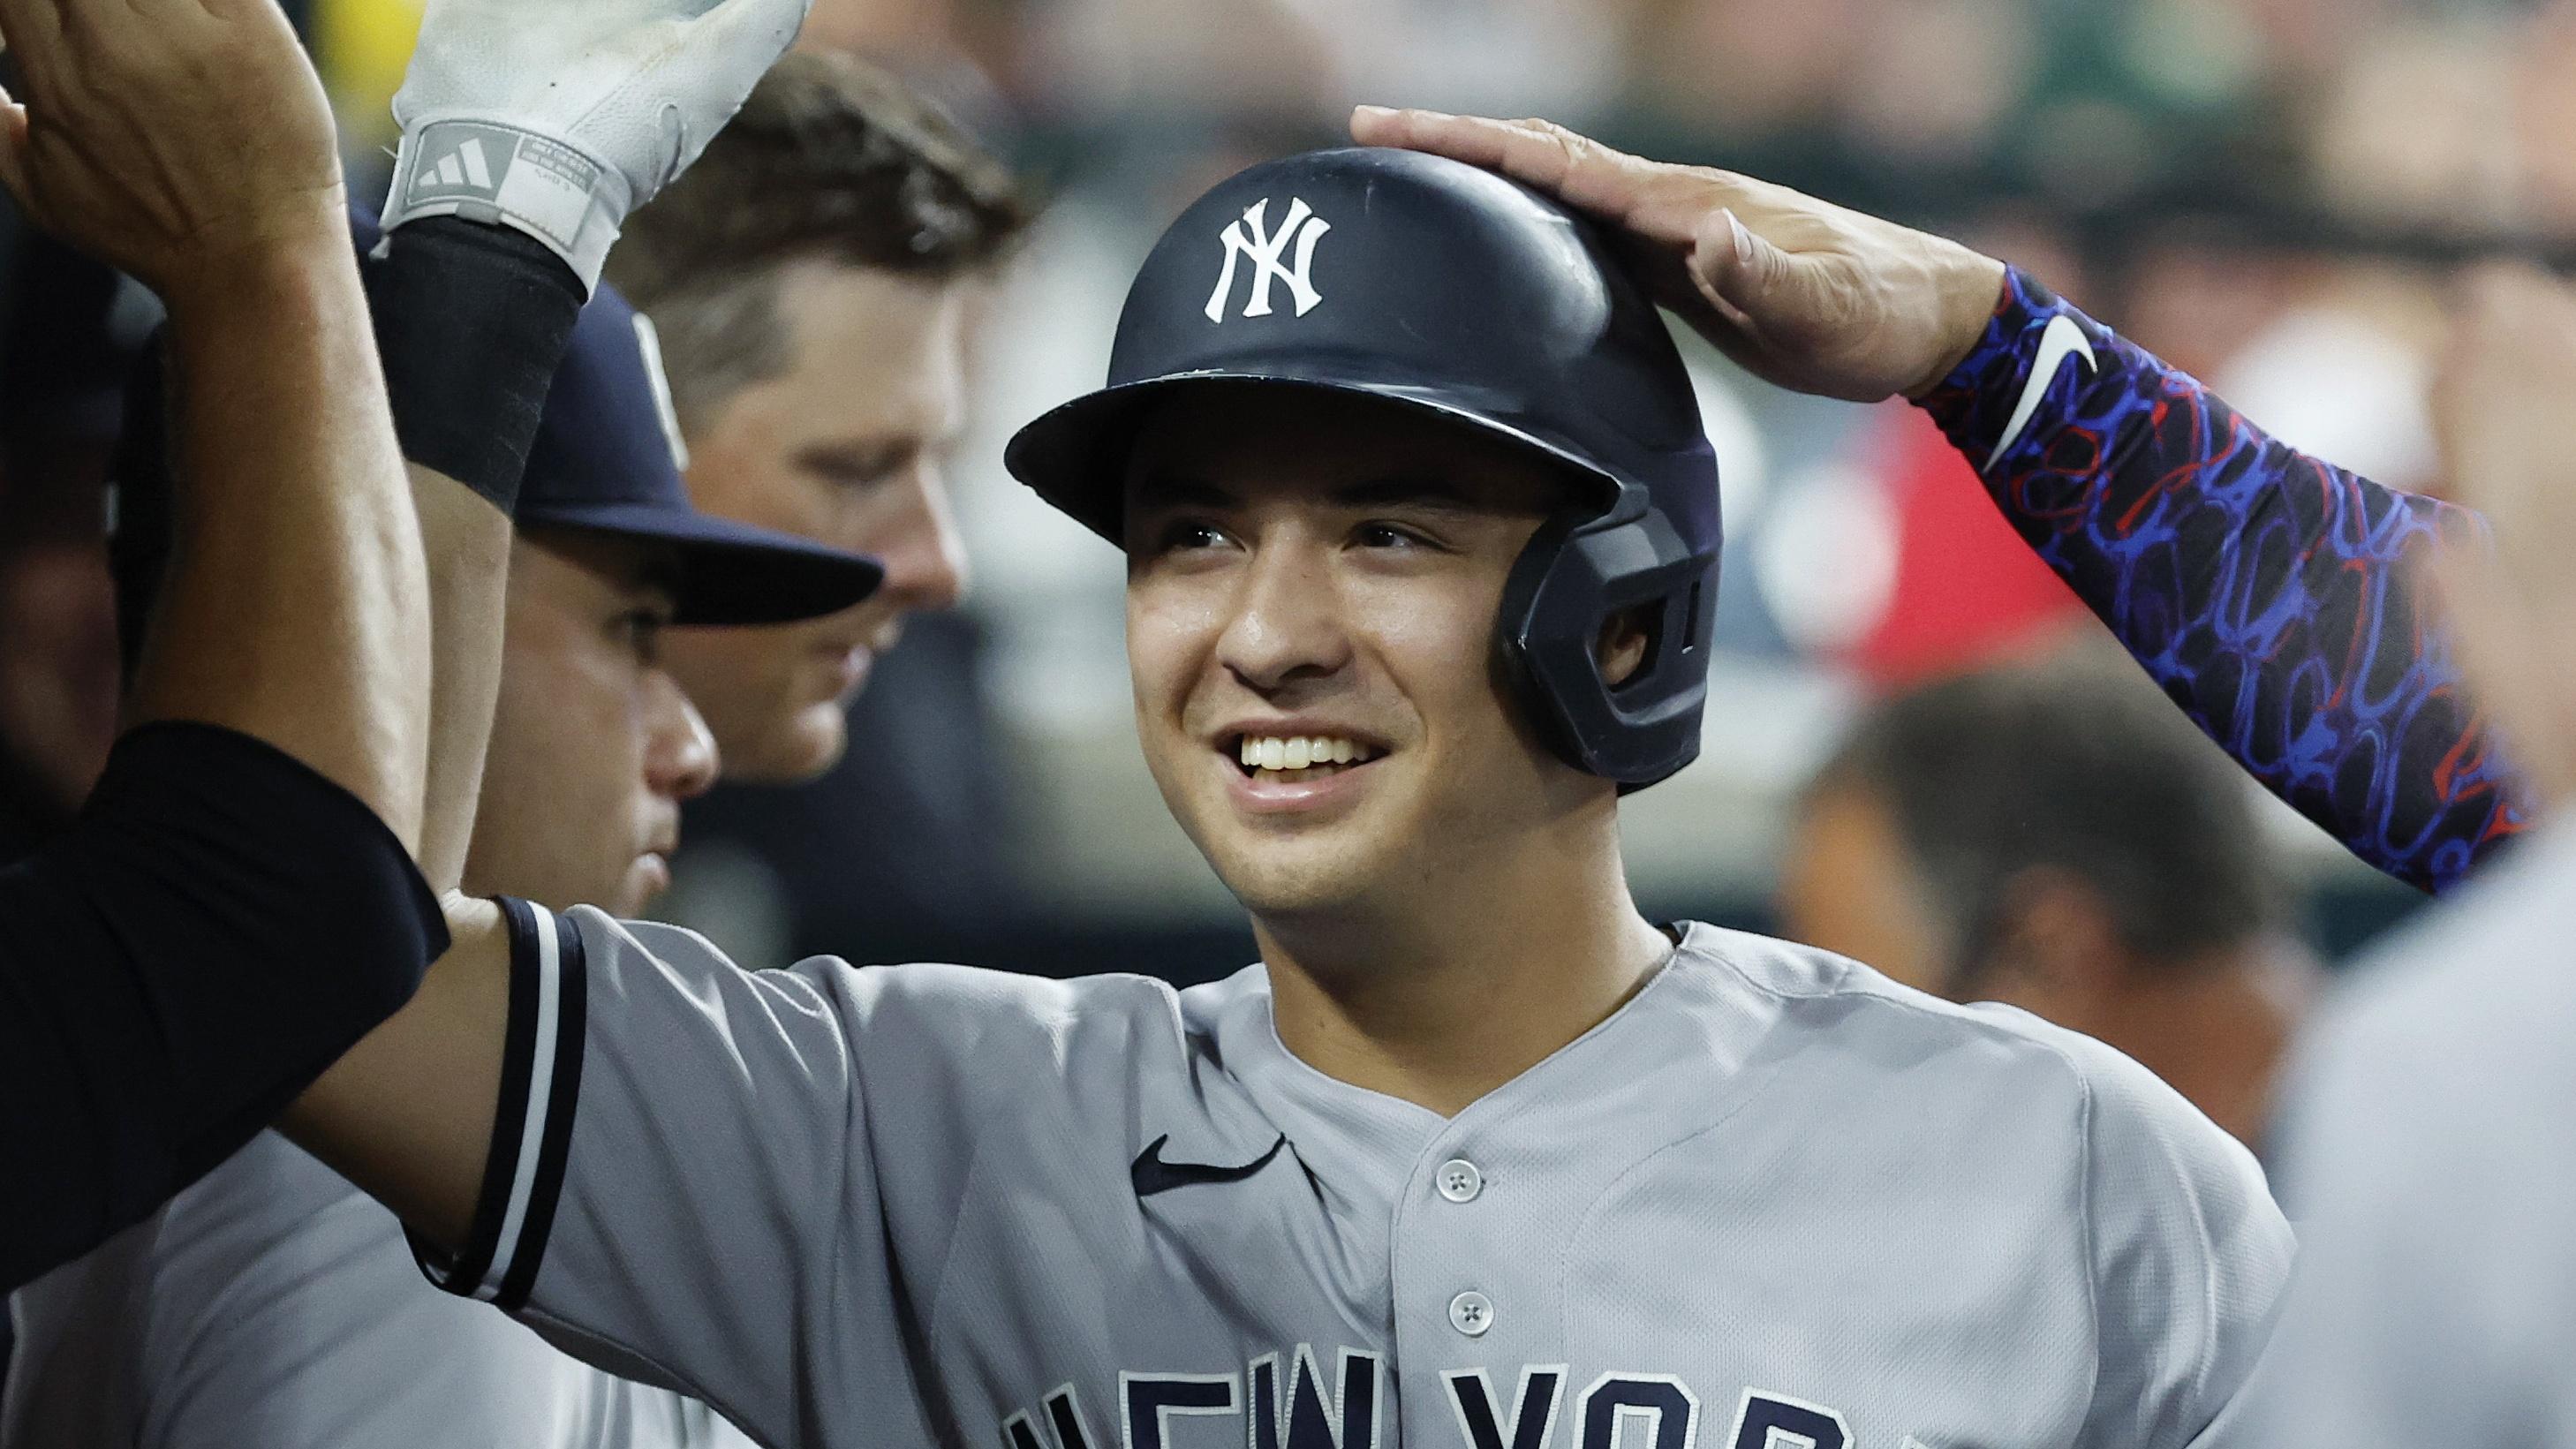 New York Yankees shortstop Anthony Volpe (11) celebrates with teammates after hitting a home run in the ninth inning against the Detroit Tigers at Comerica Park. / Rick Osentoski - USA TODAY Sports